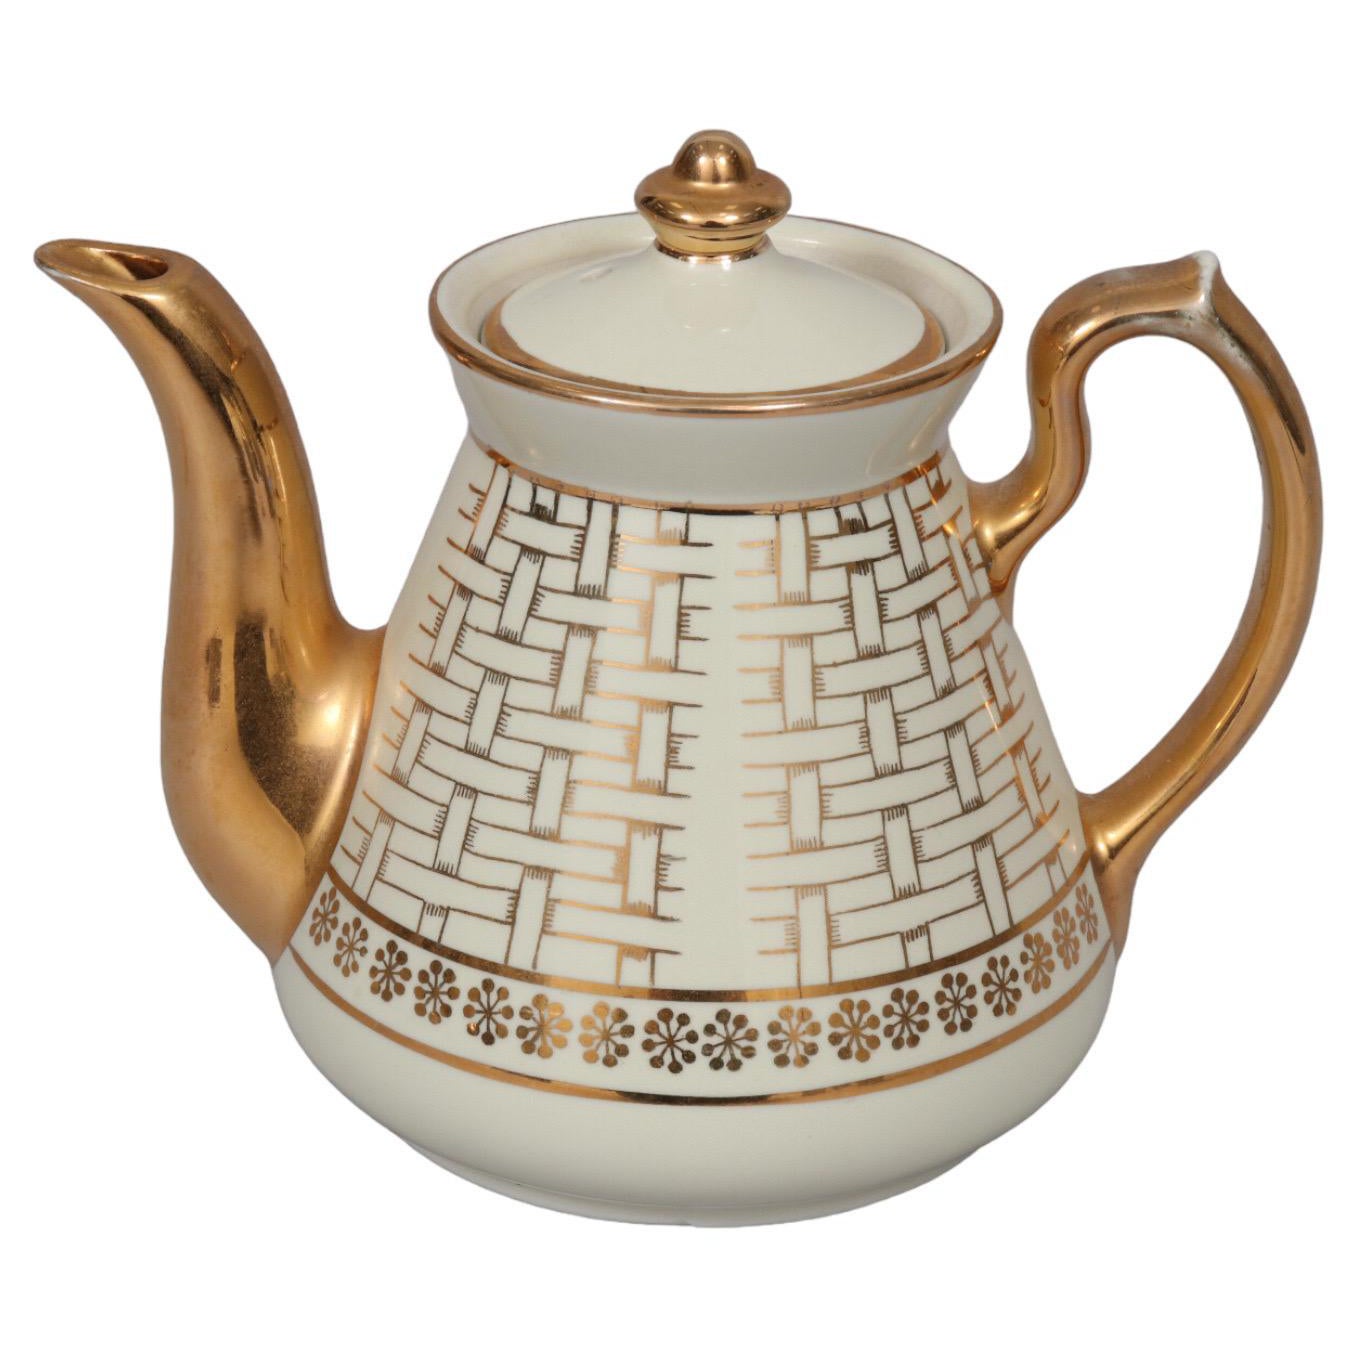 Basket Weave Ceramic Teapot by Hall's